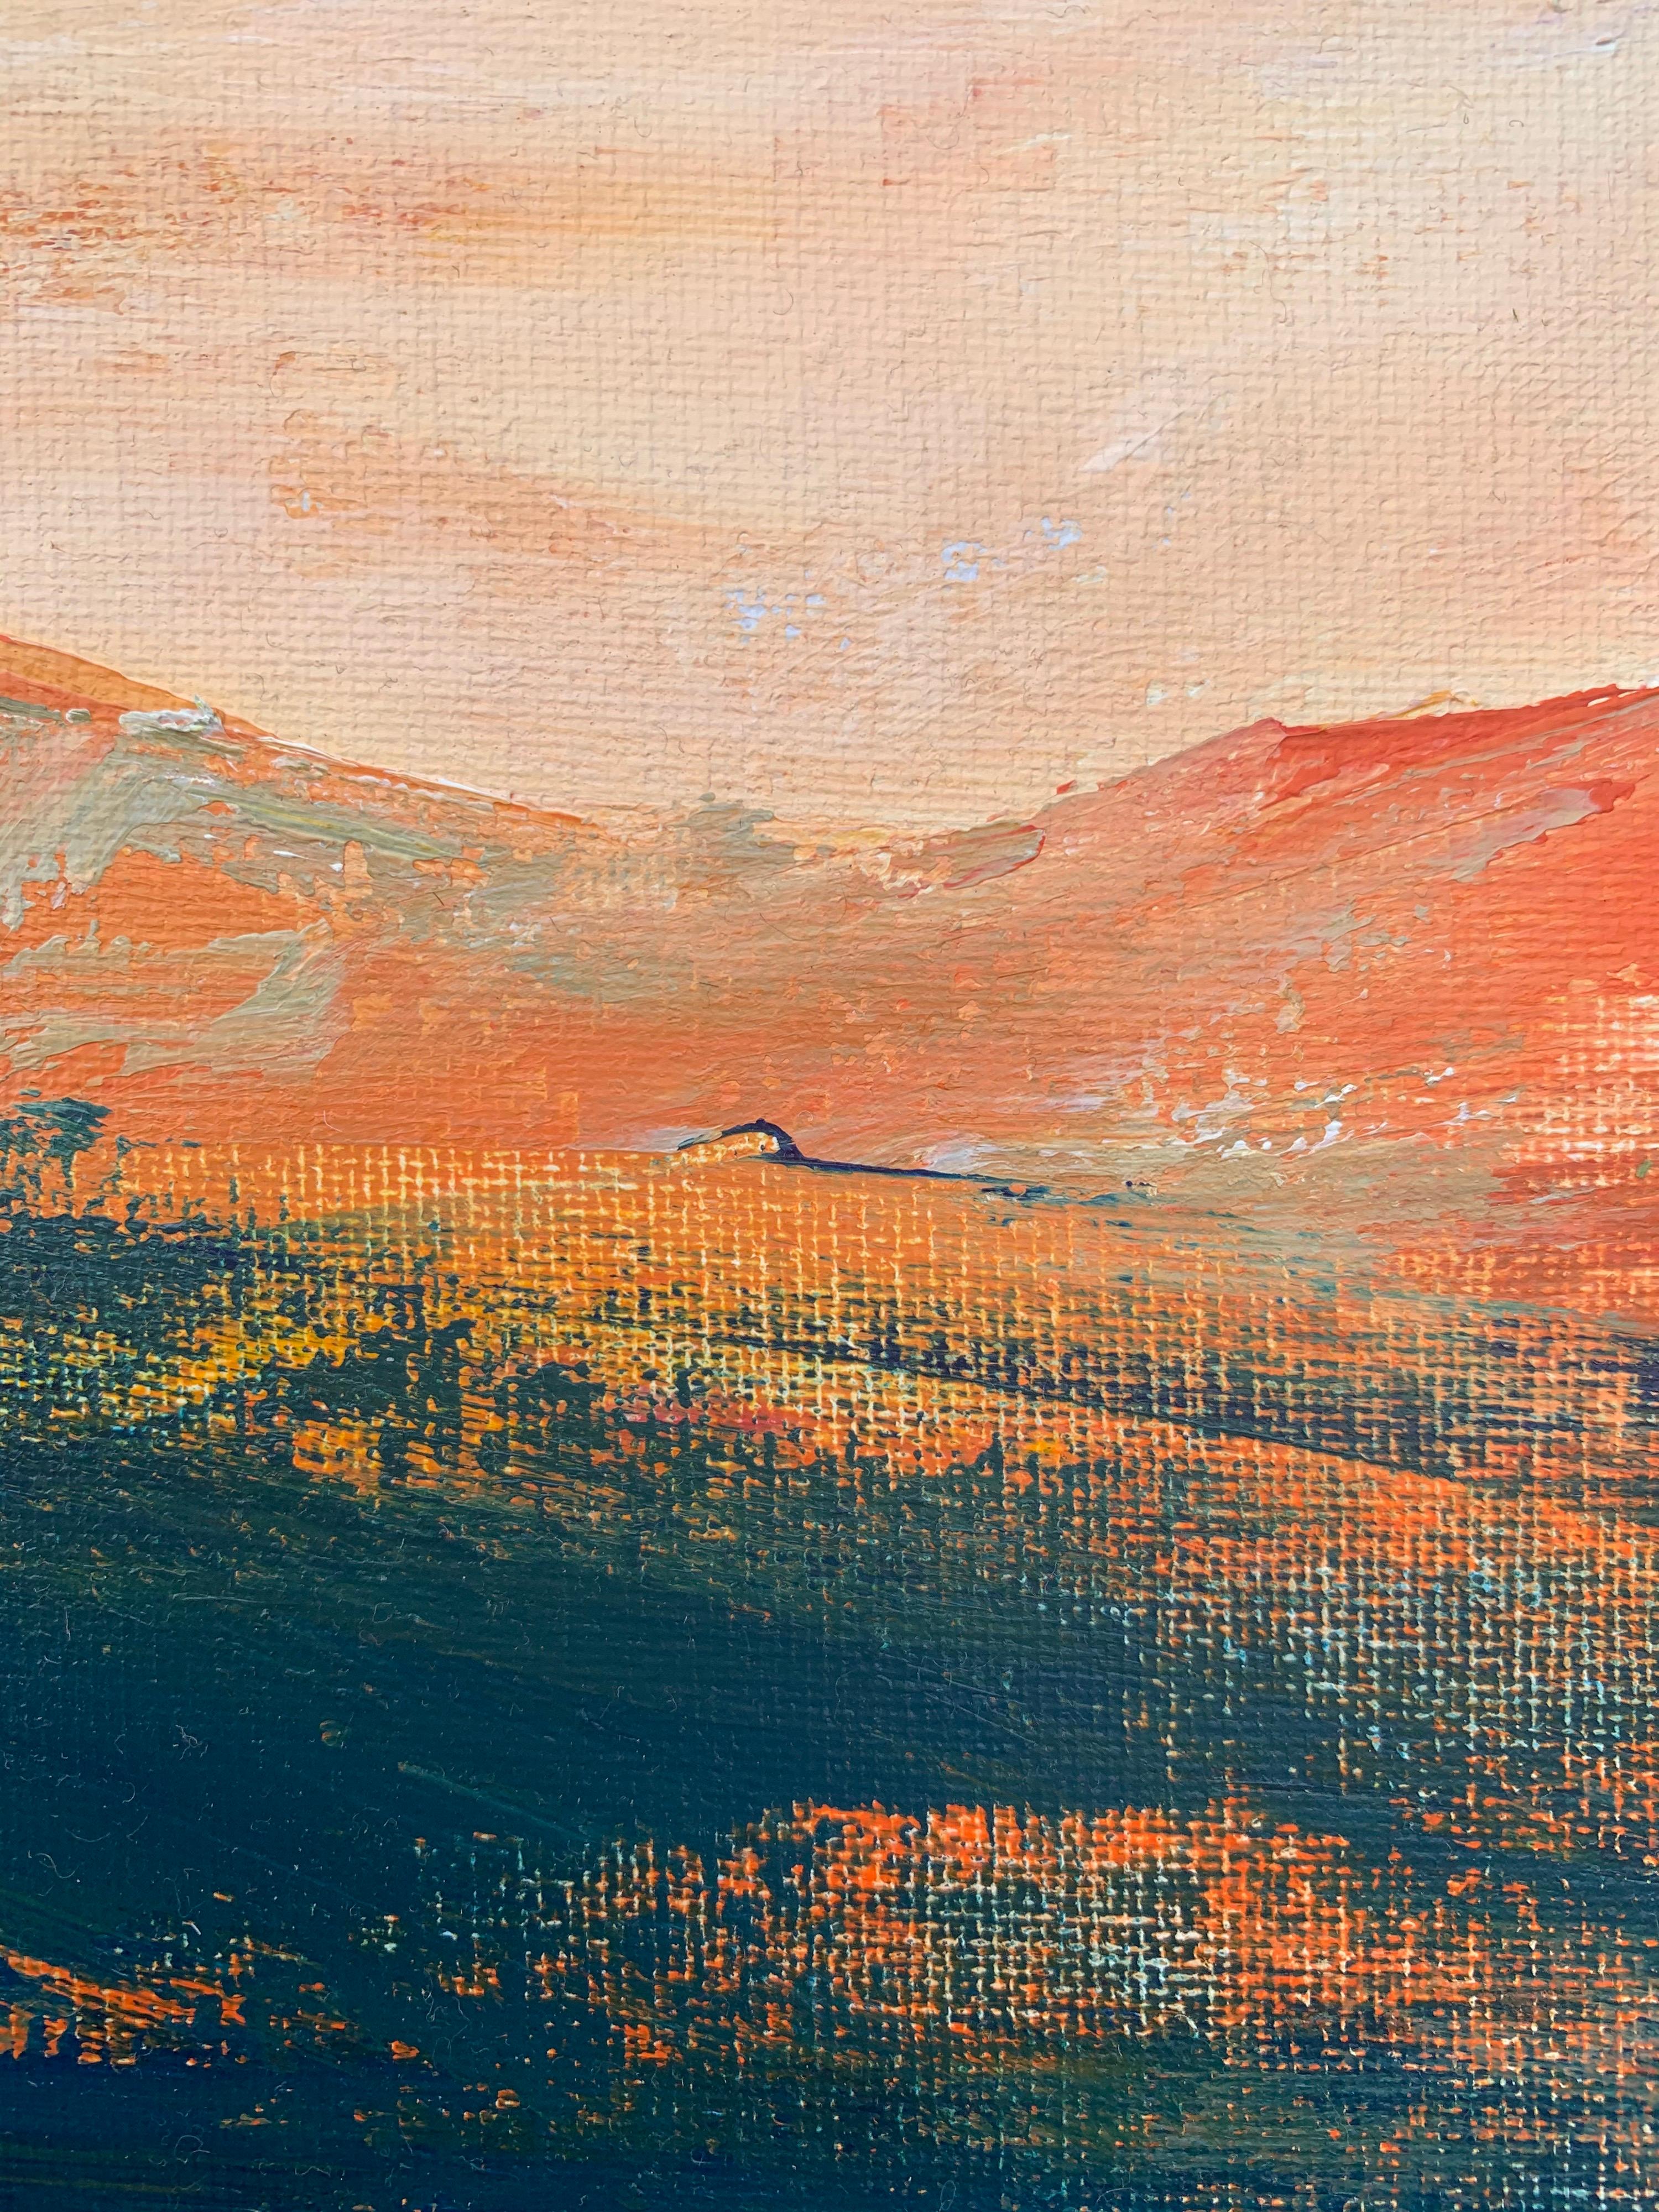 Abstract Orange & Black Mountain Landscape Study by Contemporary British Artist For Sale 5